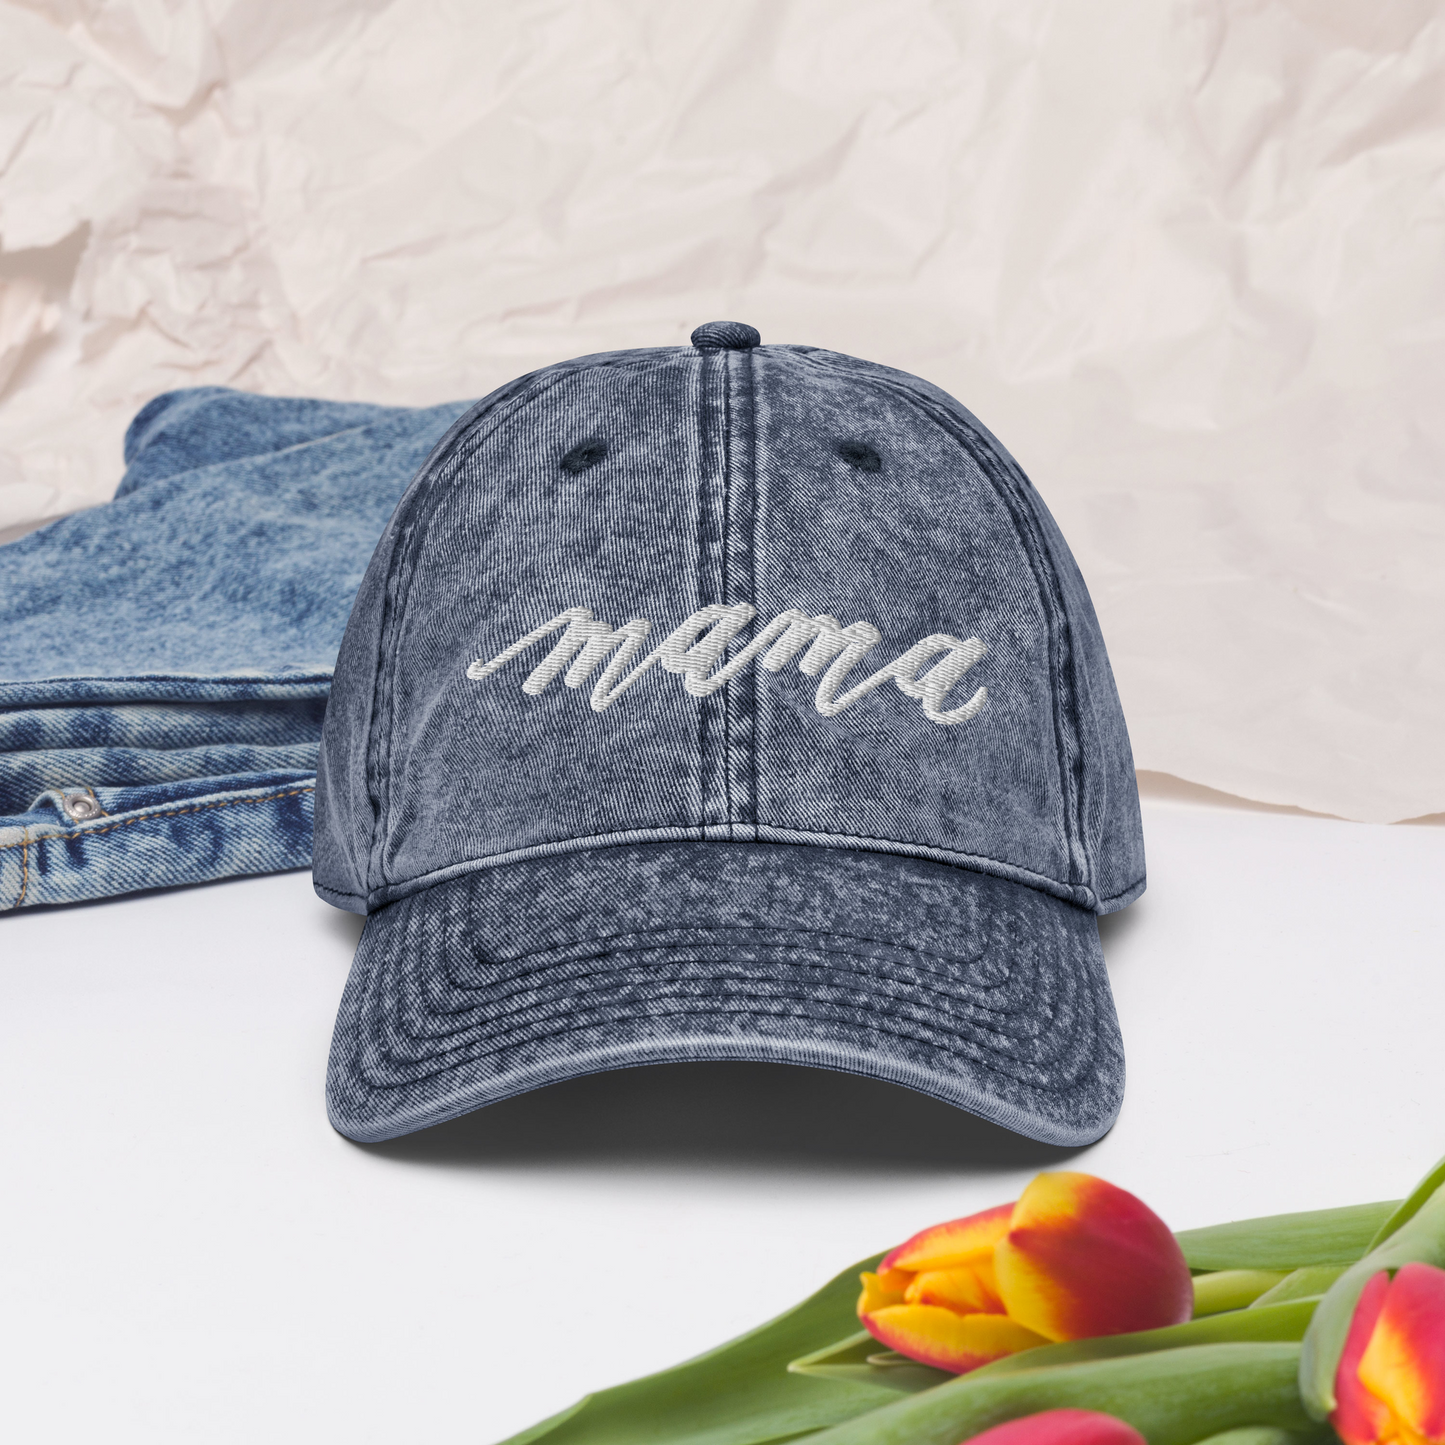 Embroidered Script "Mama" Calligraphy Vintage Cotton Twill Cap